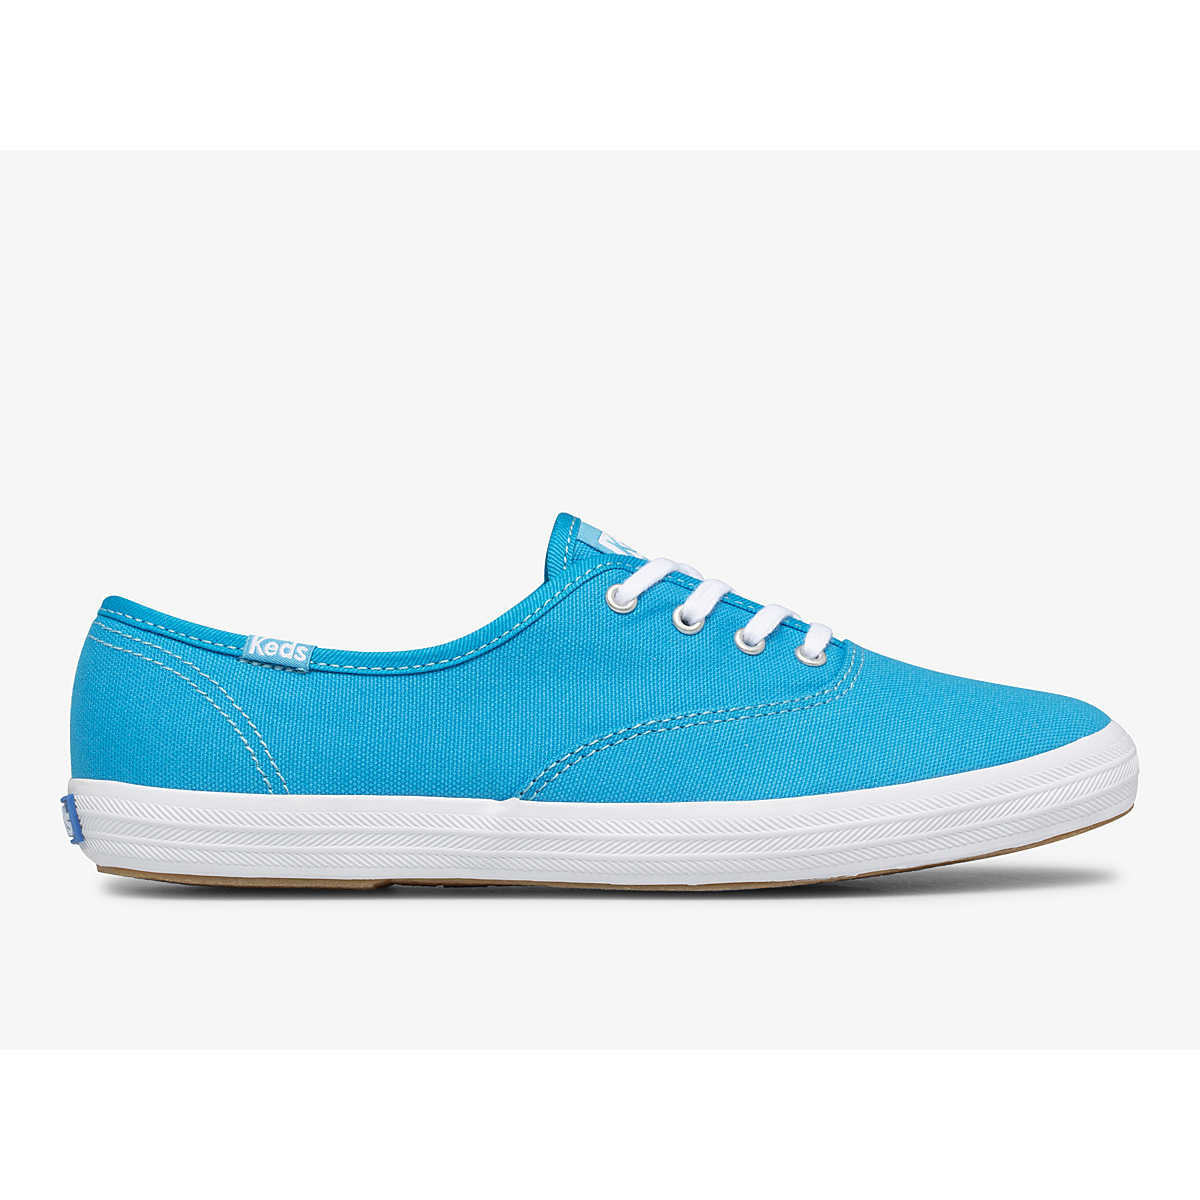 Keds Champion Canvas Neon Washable Sneaker In Neon Blue